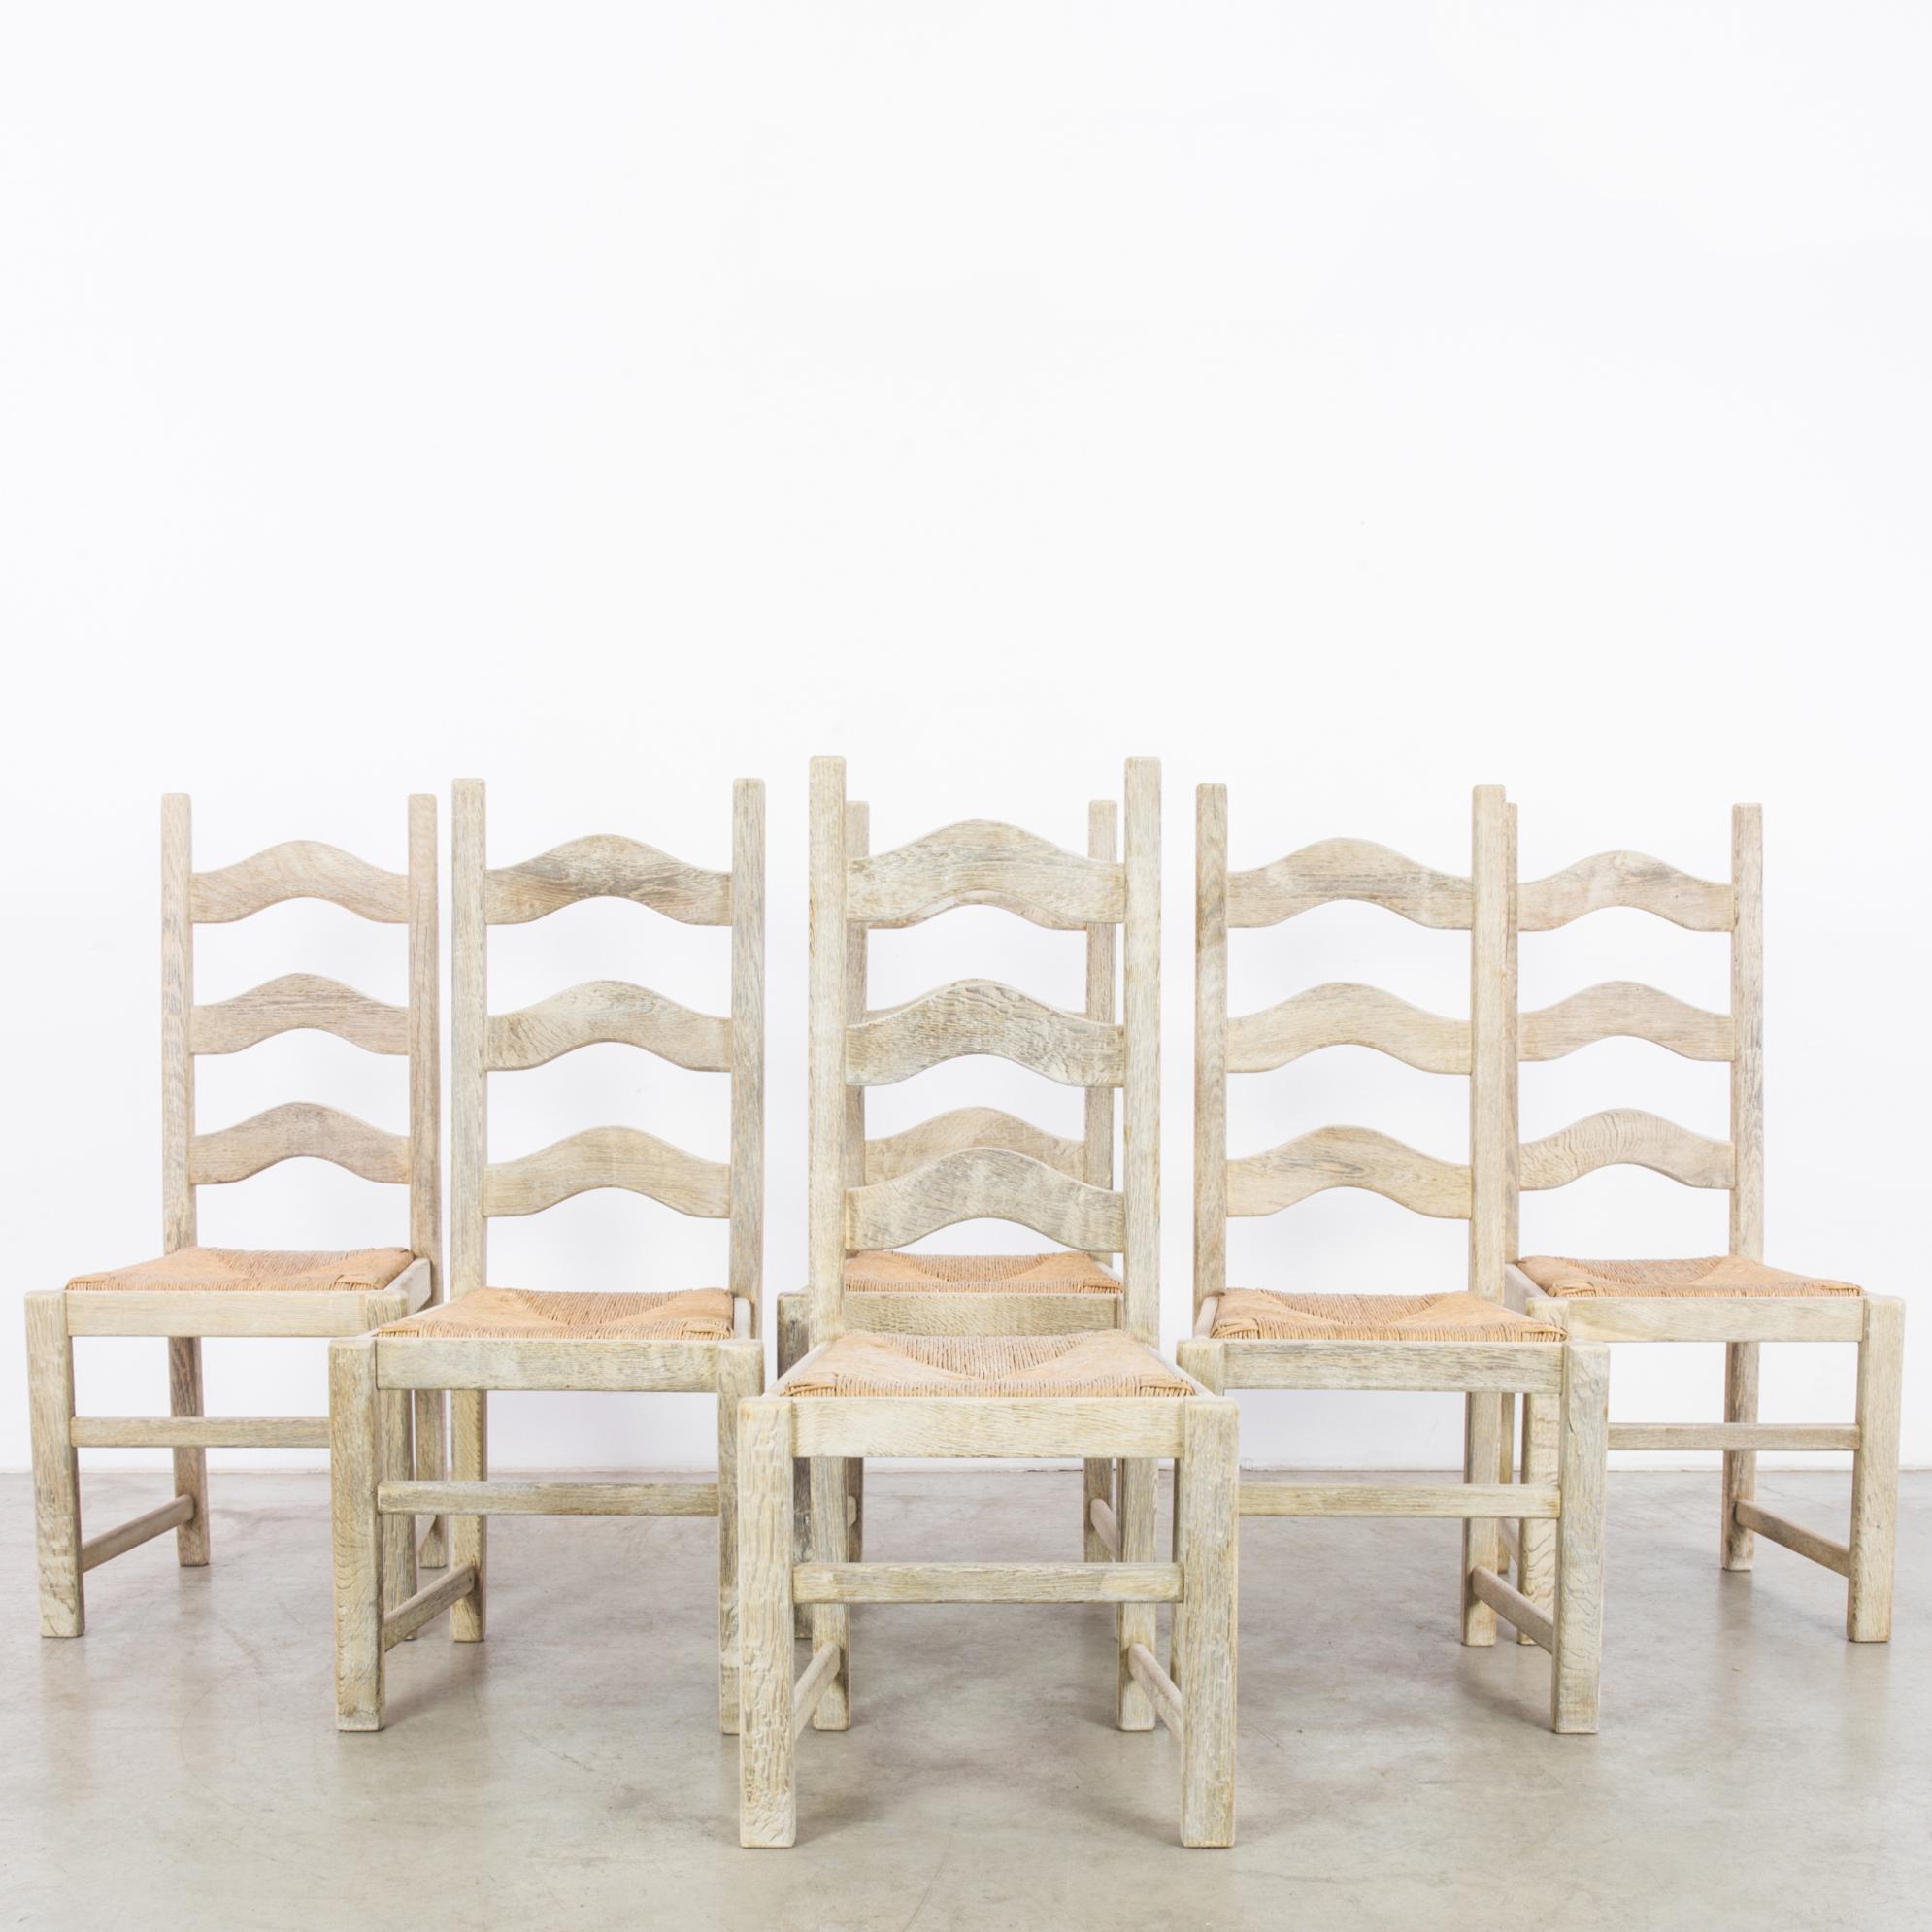 A set of six wooden dining chairs with woven seats from Belgium, produced circa 1958. Featuring tall ladder style back rests, straight struts, and a refurbished weave, these are a set of beautifully crafted rustic chairs. The rhomboid shape of the